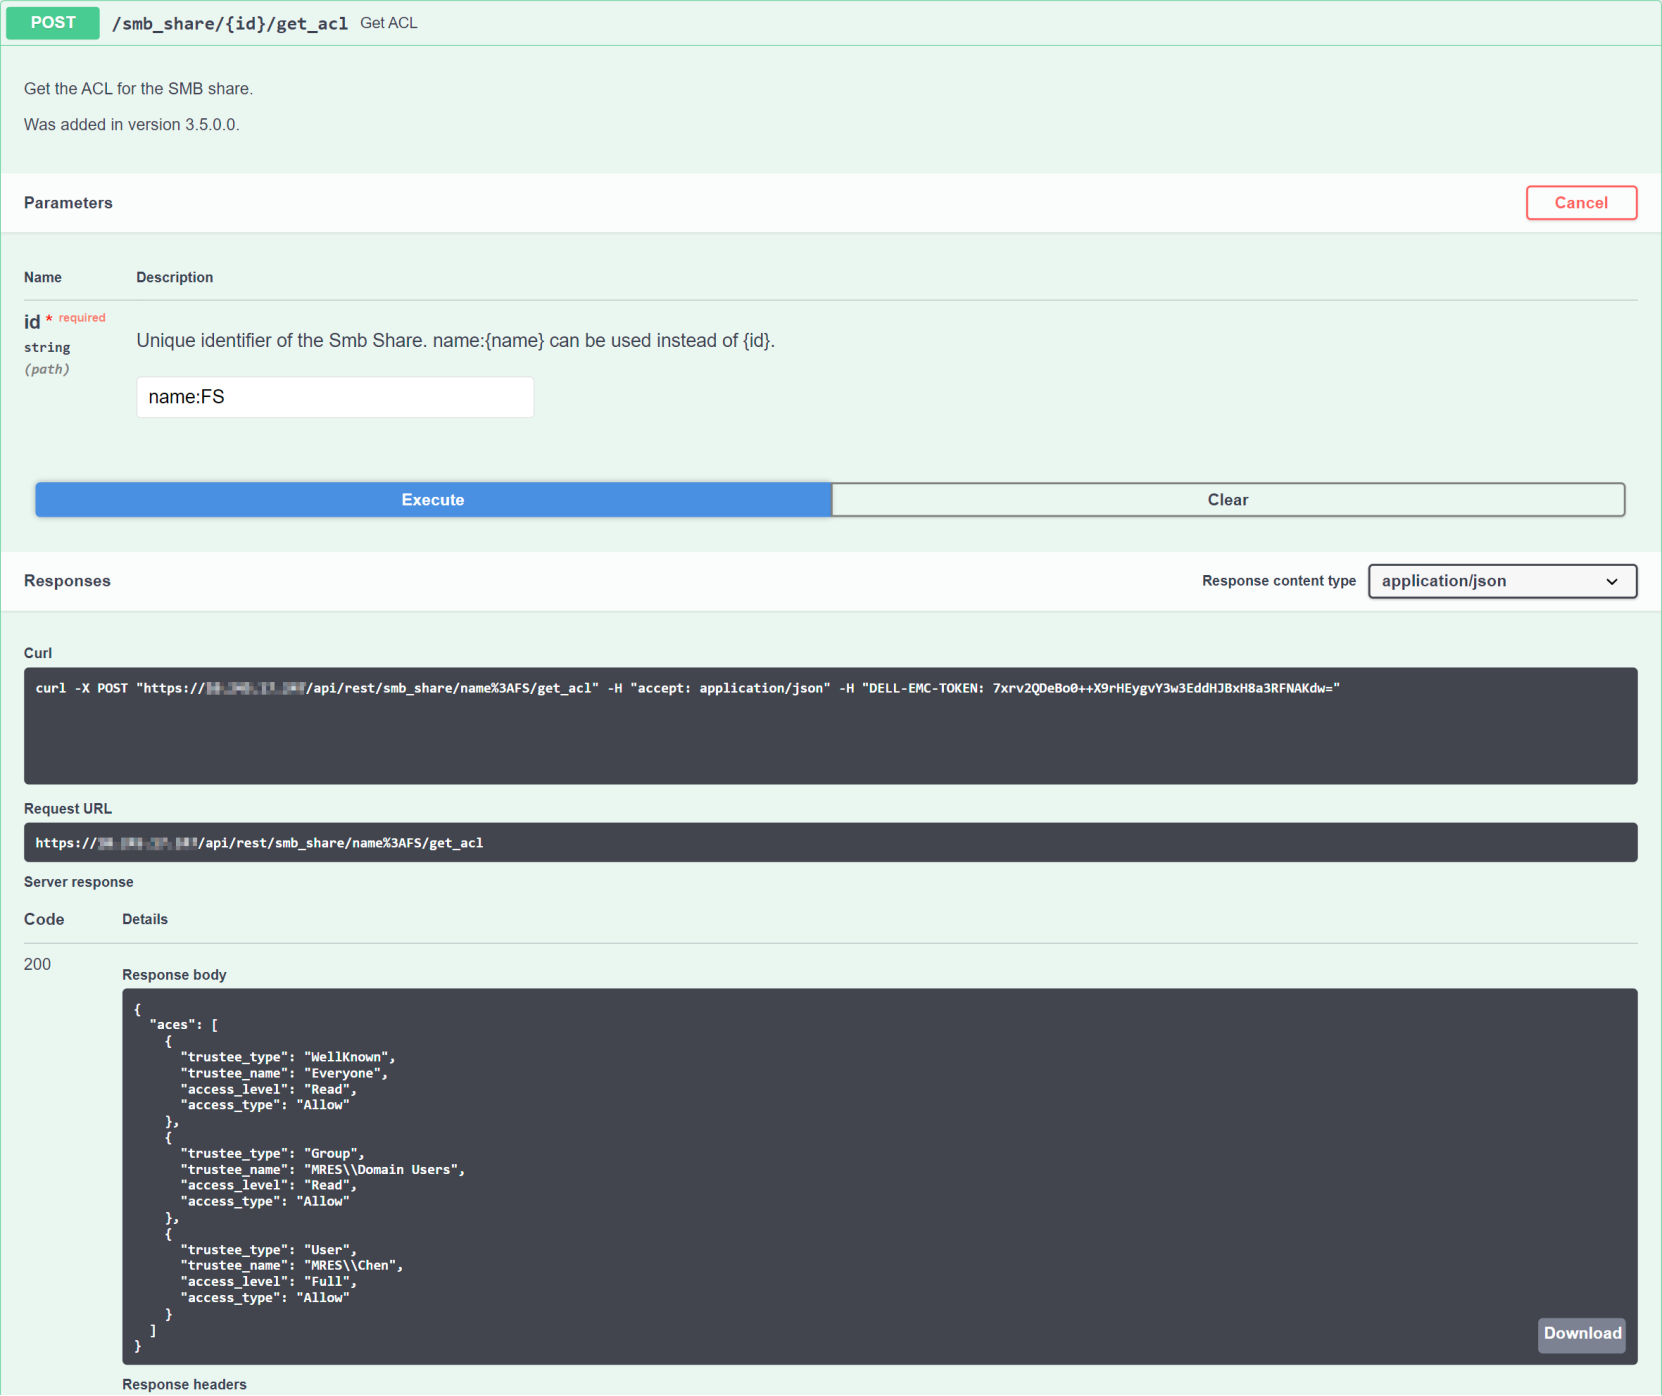 A screenshot of SwaggerUI showing how to use the REST API to retrieve the ACL of a share.